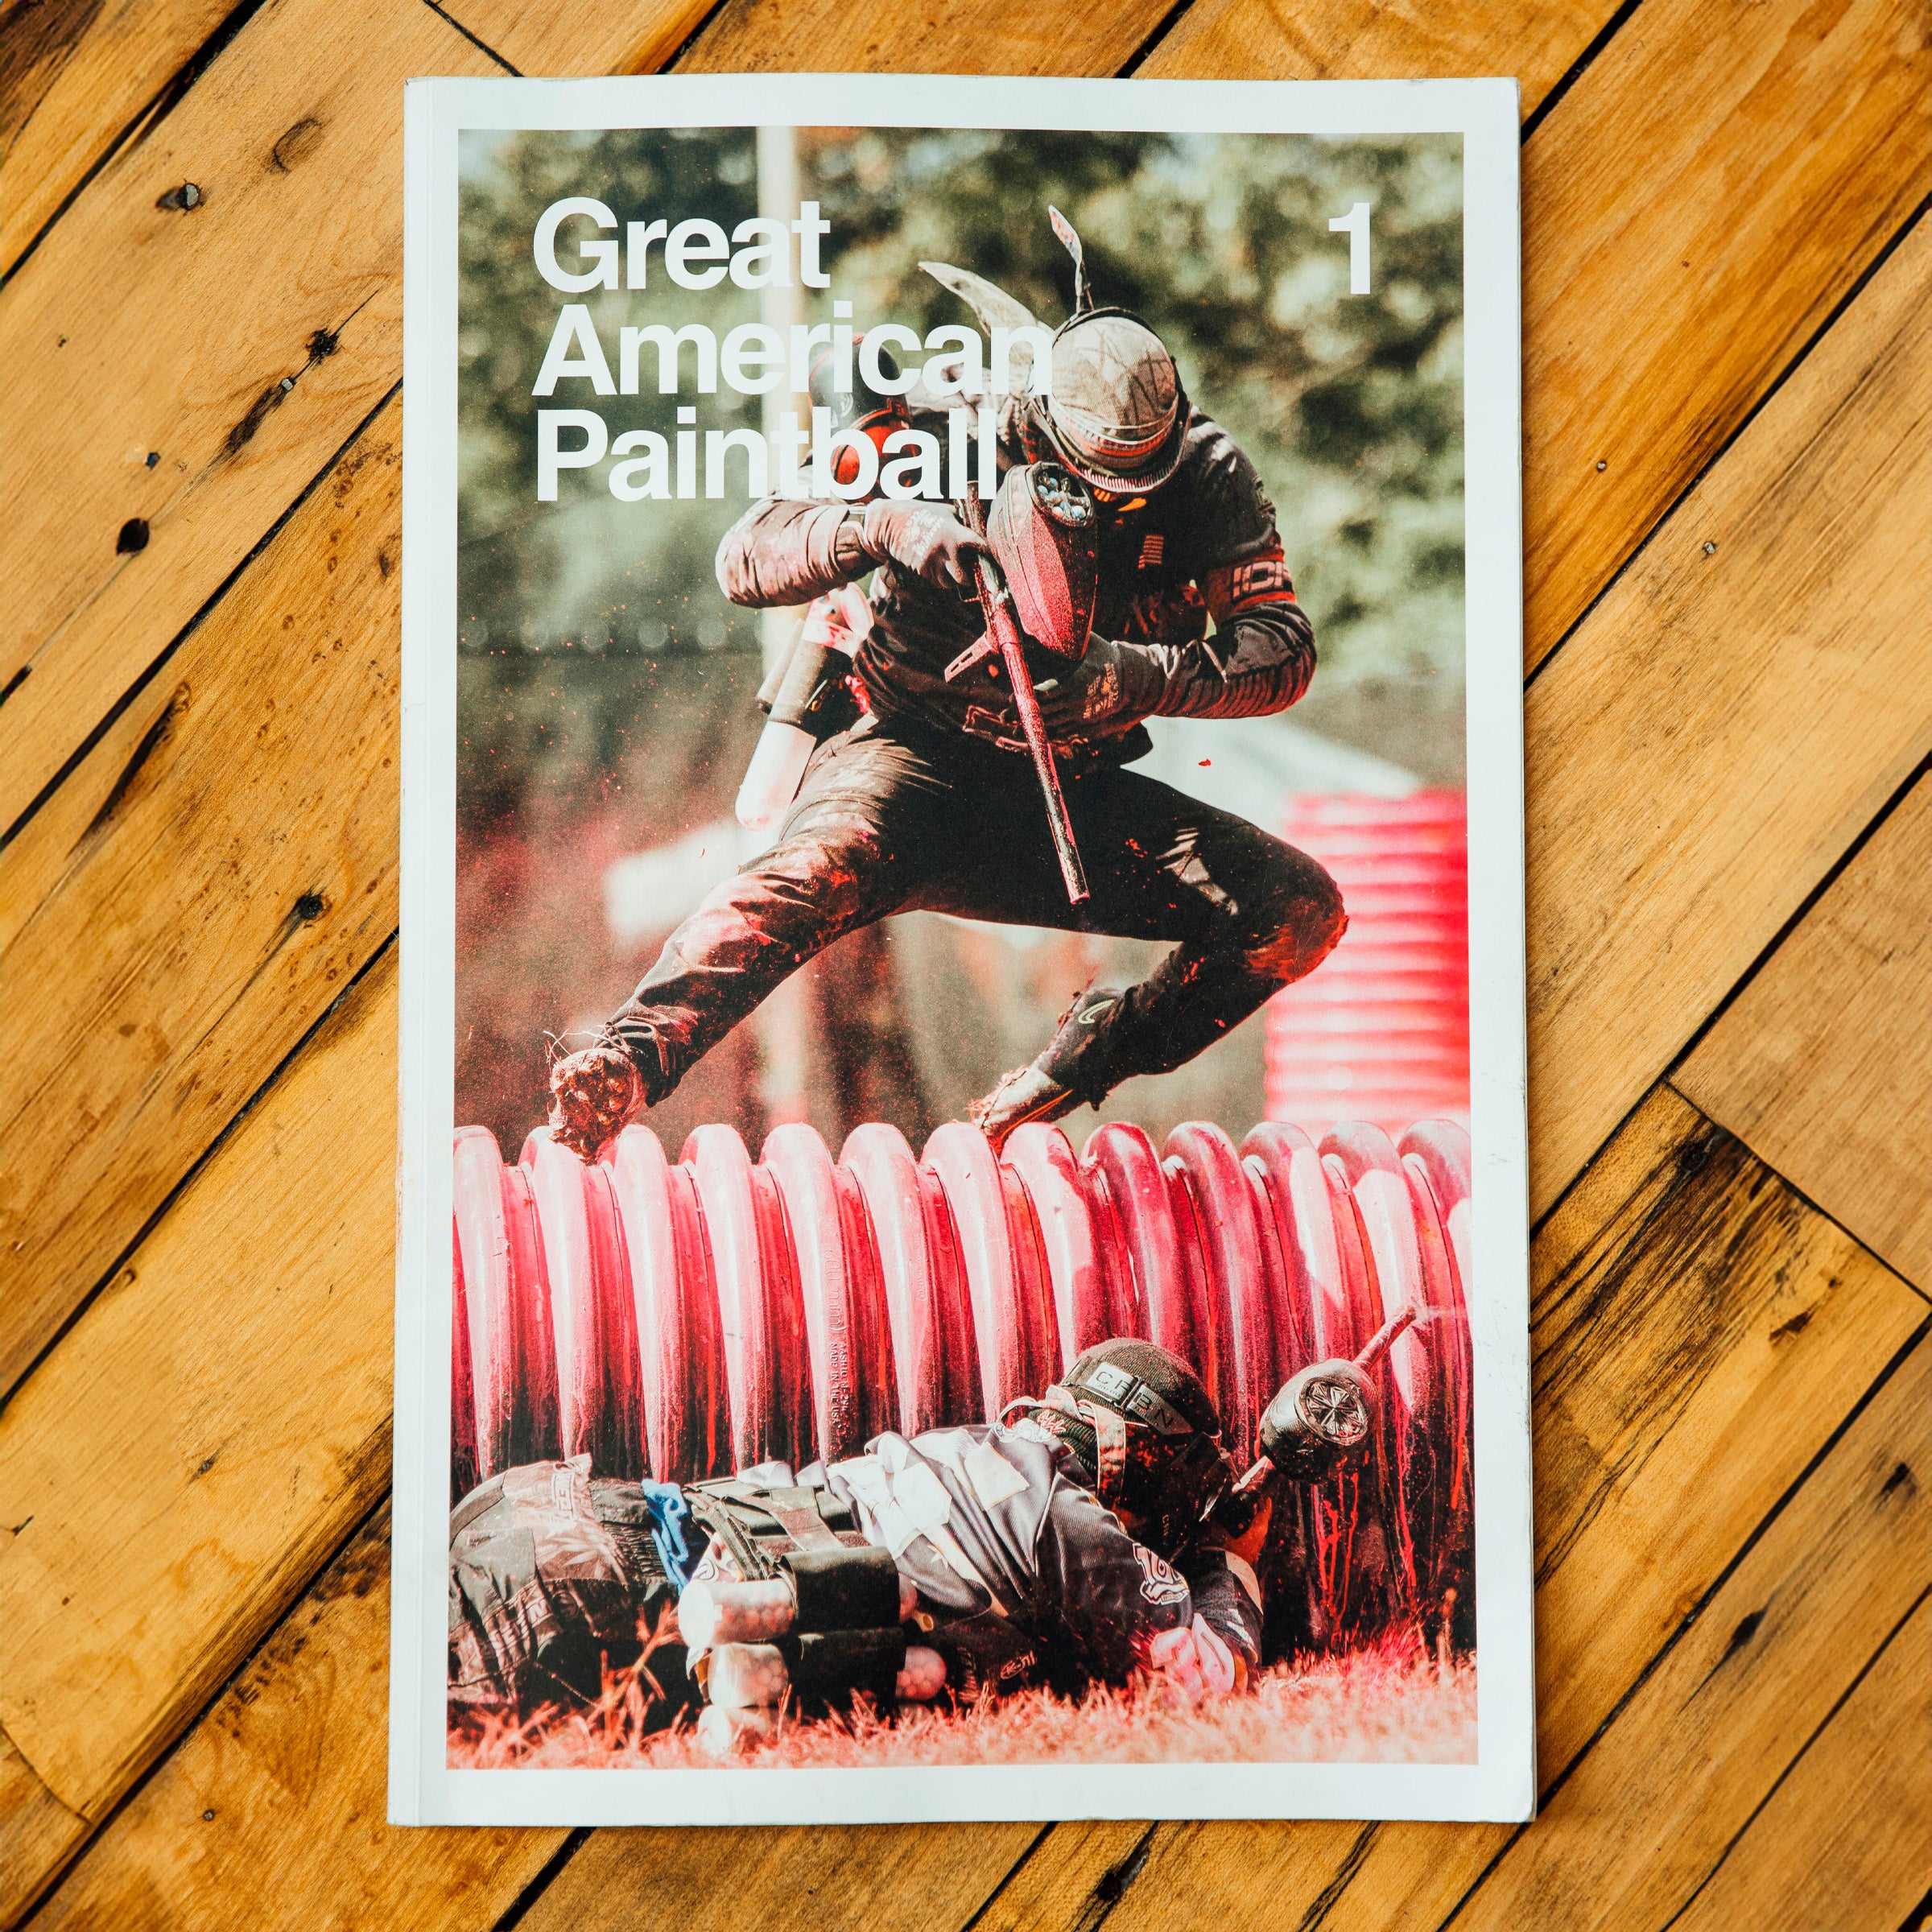 Great American Paintball Subscription (2 issues) $40/issue. Delivery in spring and fall